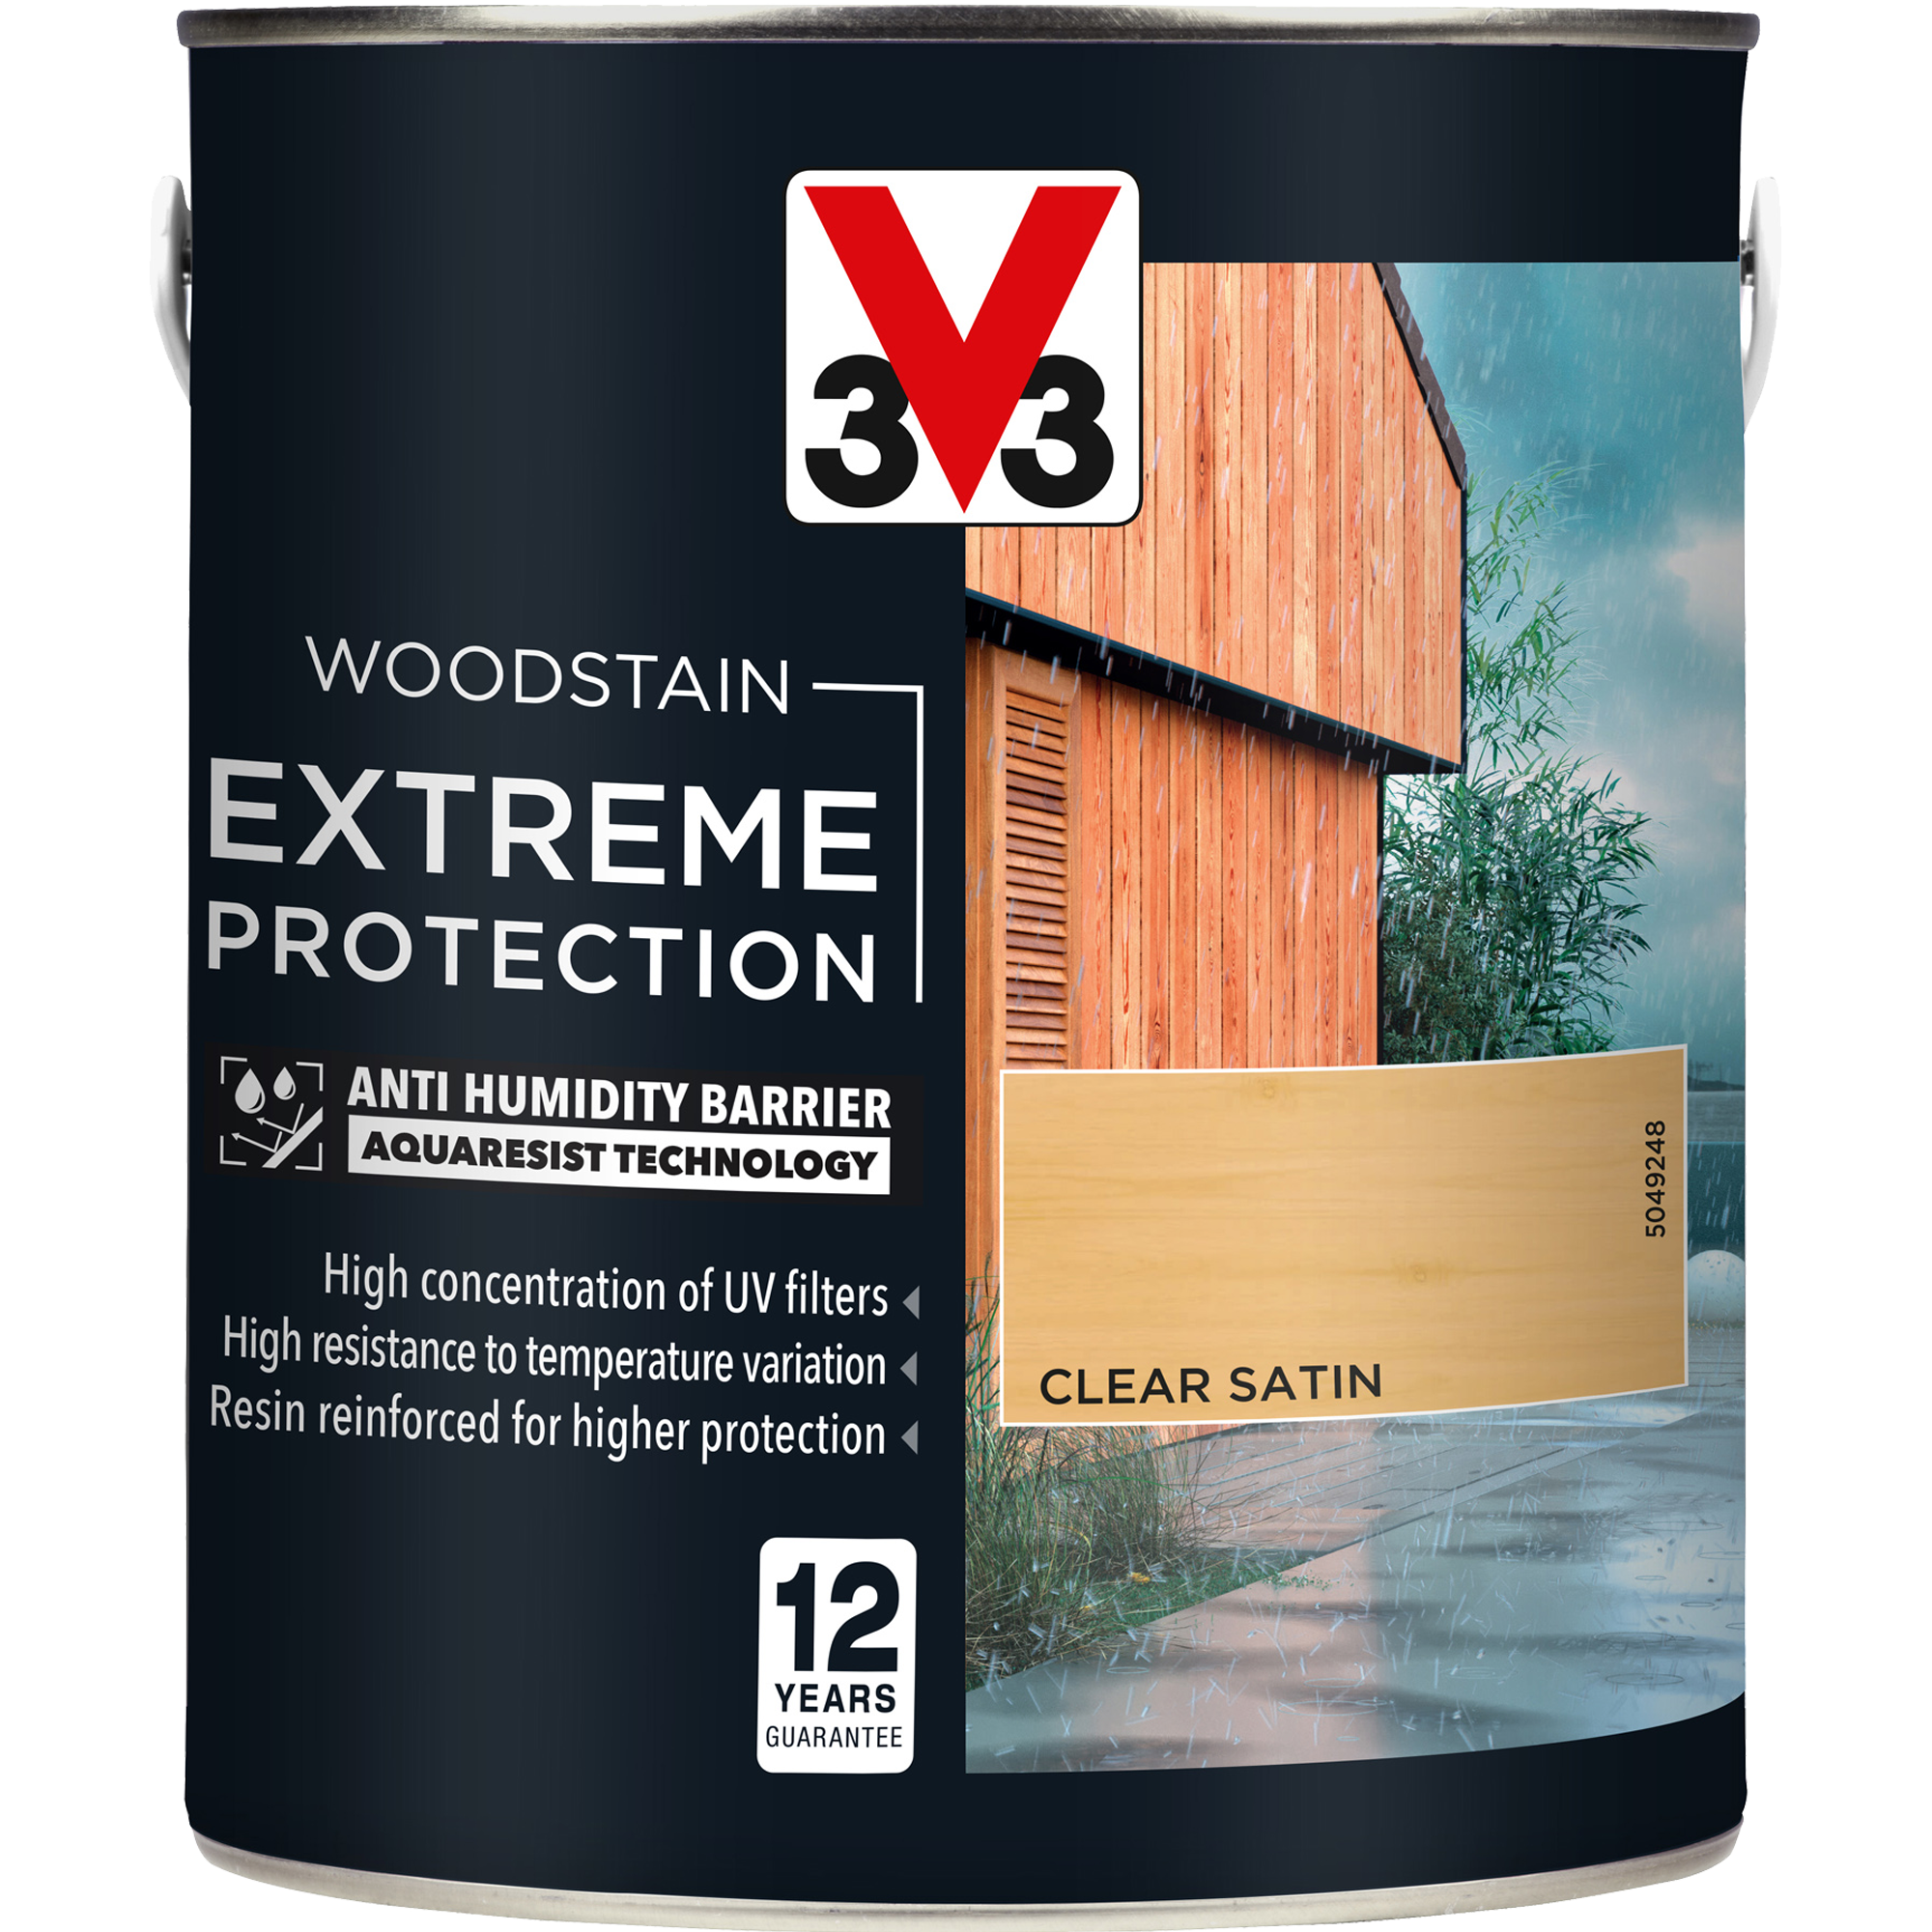 V33 Extreme Protection Woodstain